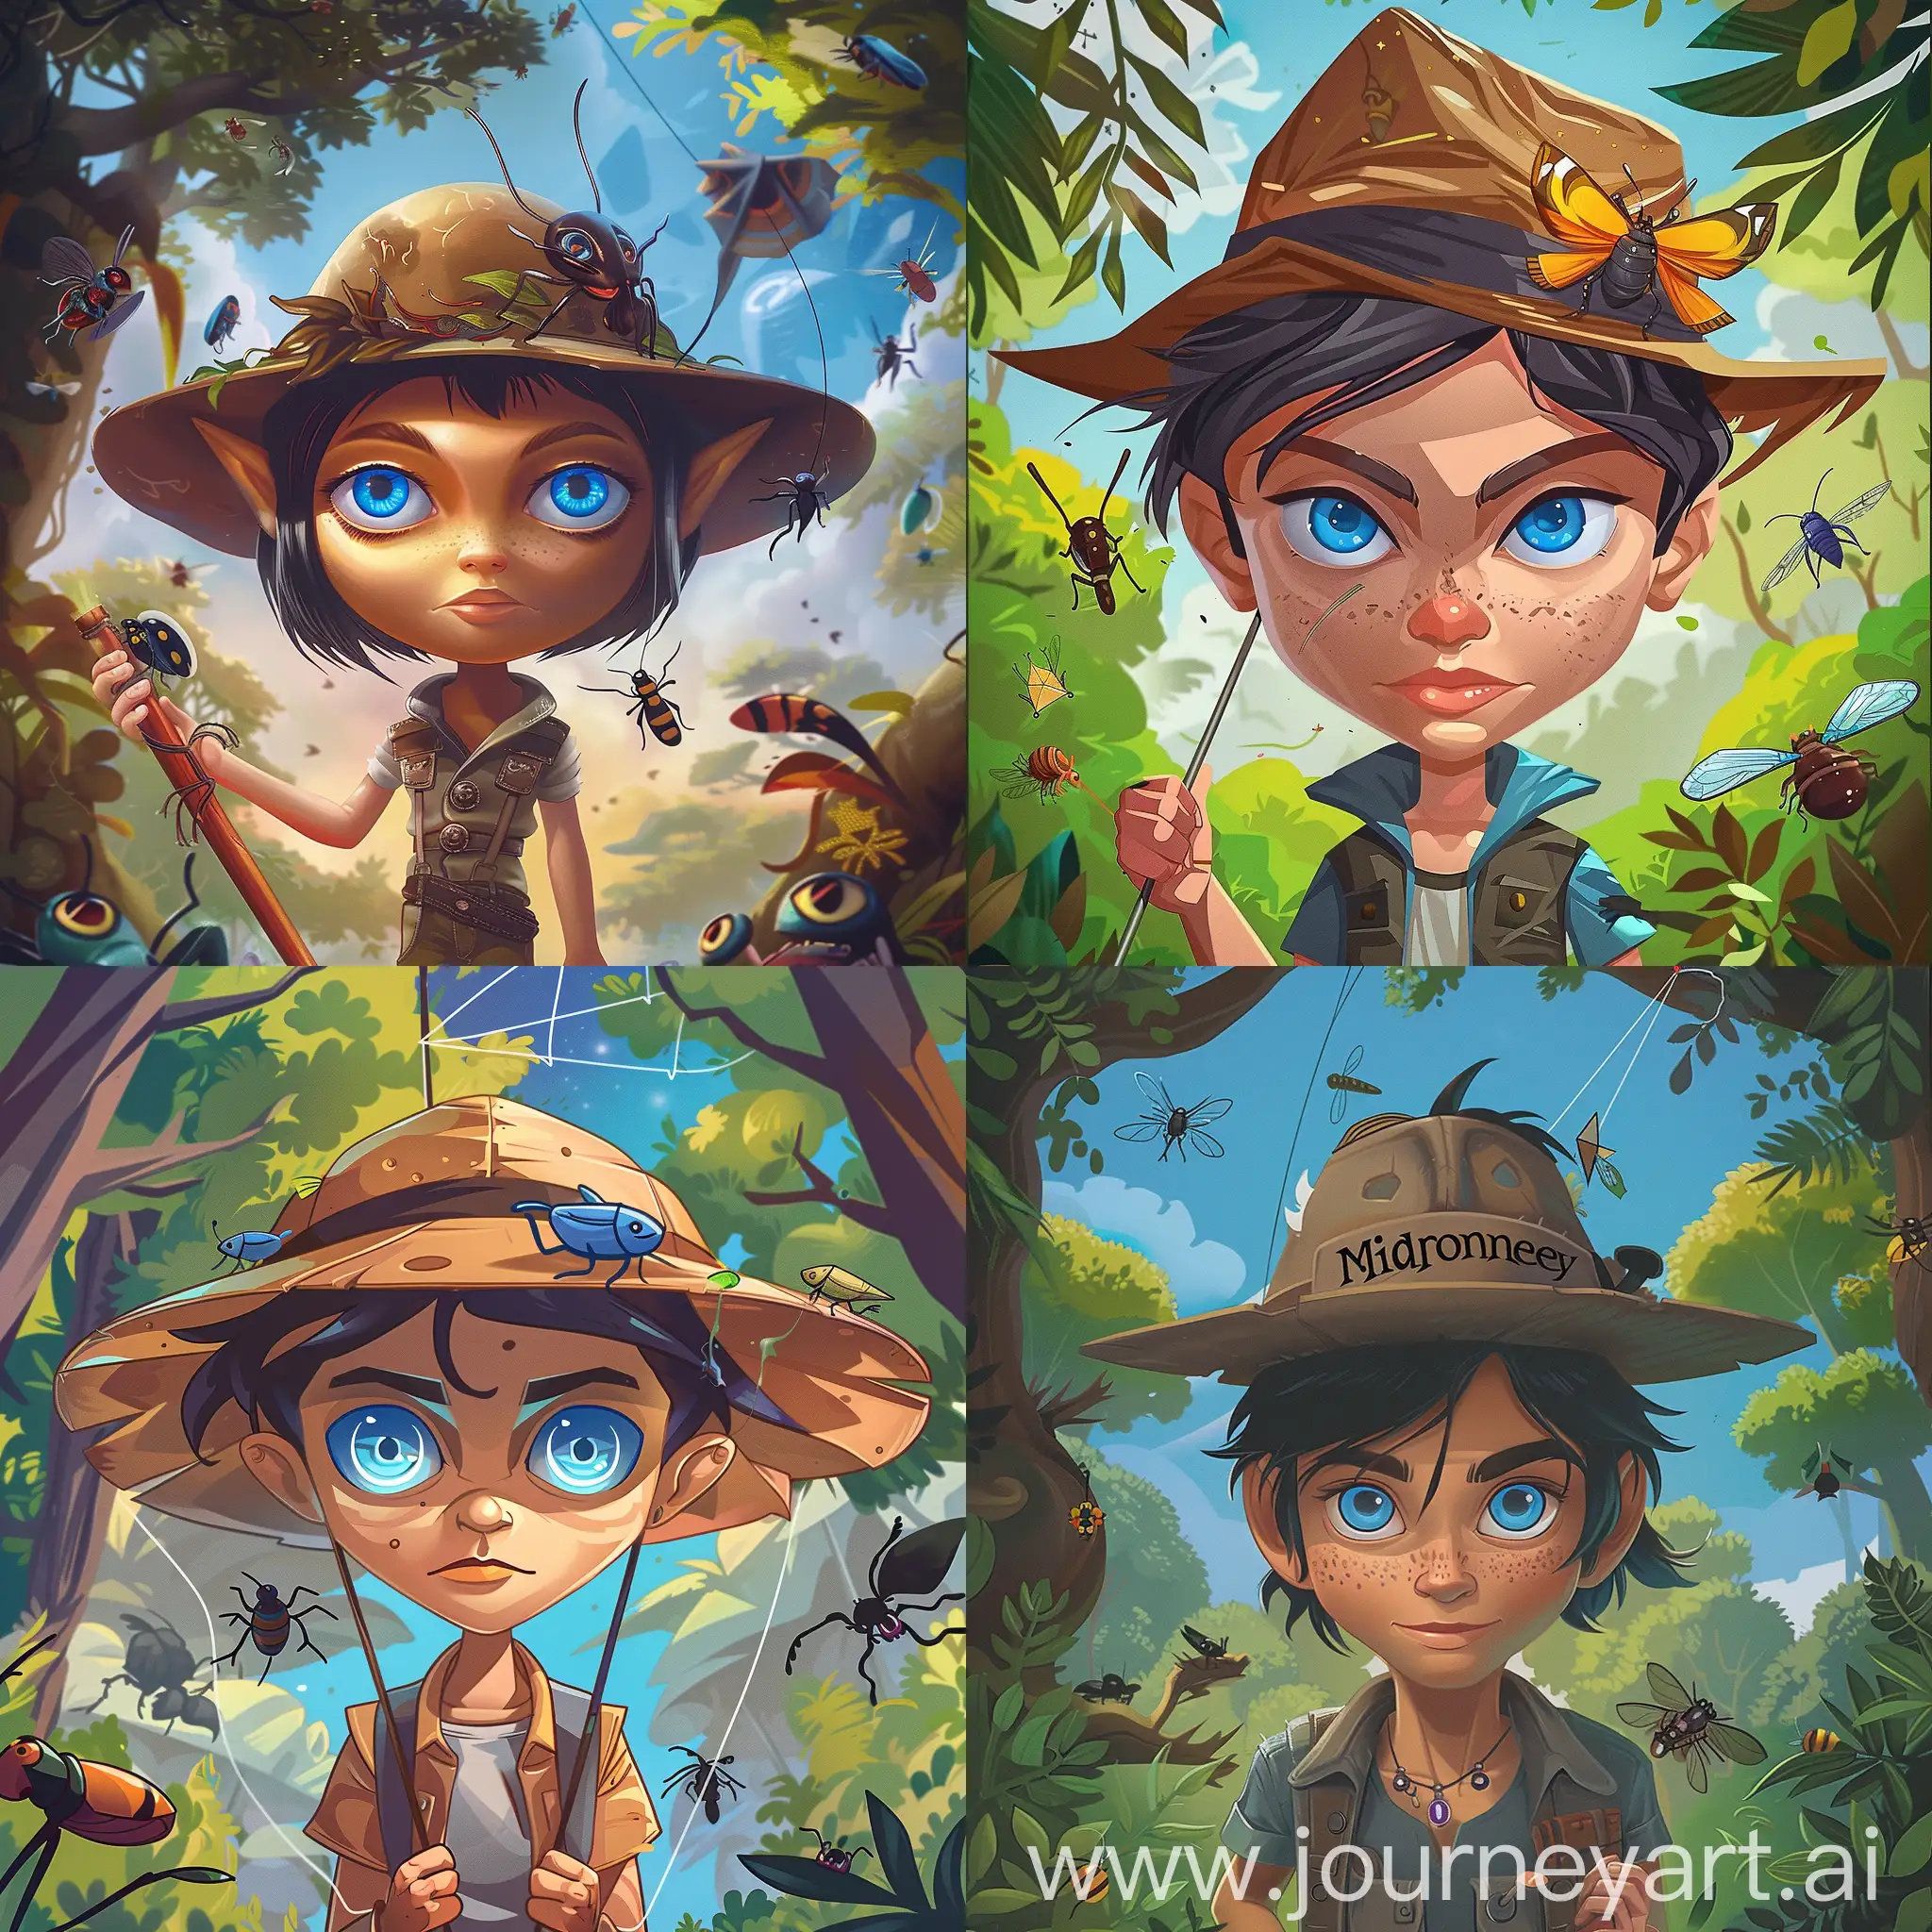 Create a cartoon character named Midjorney with blue eyes, wearing a hat, holding a kite, and set against a nature background with trees and insects.